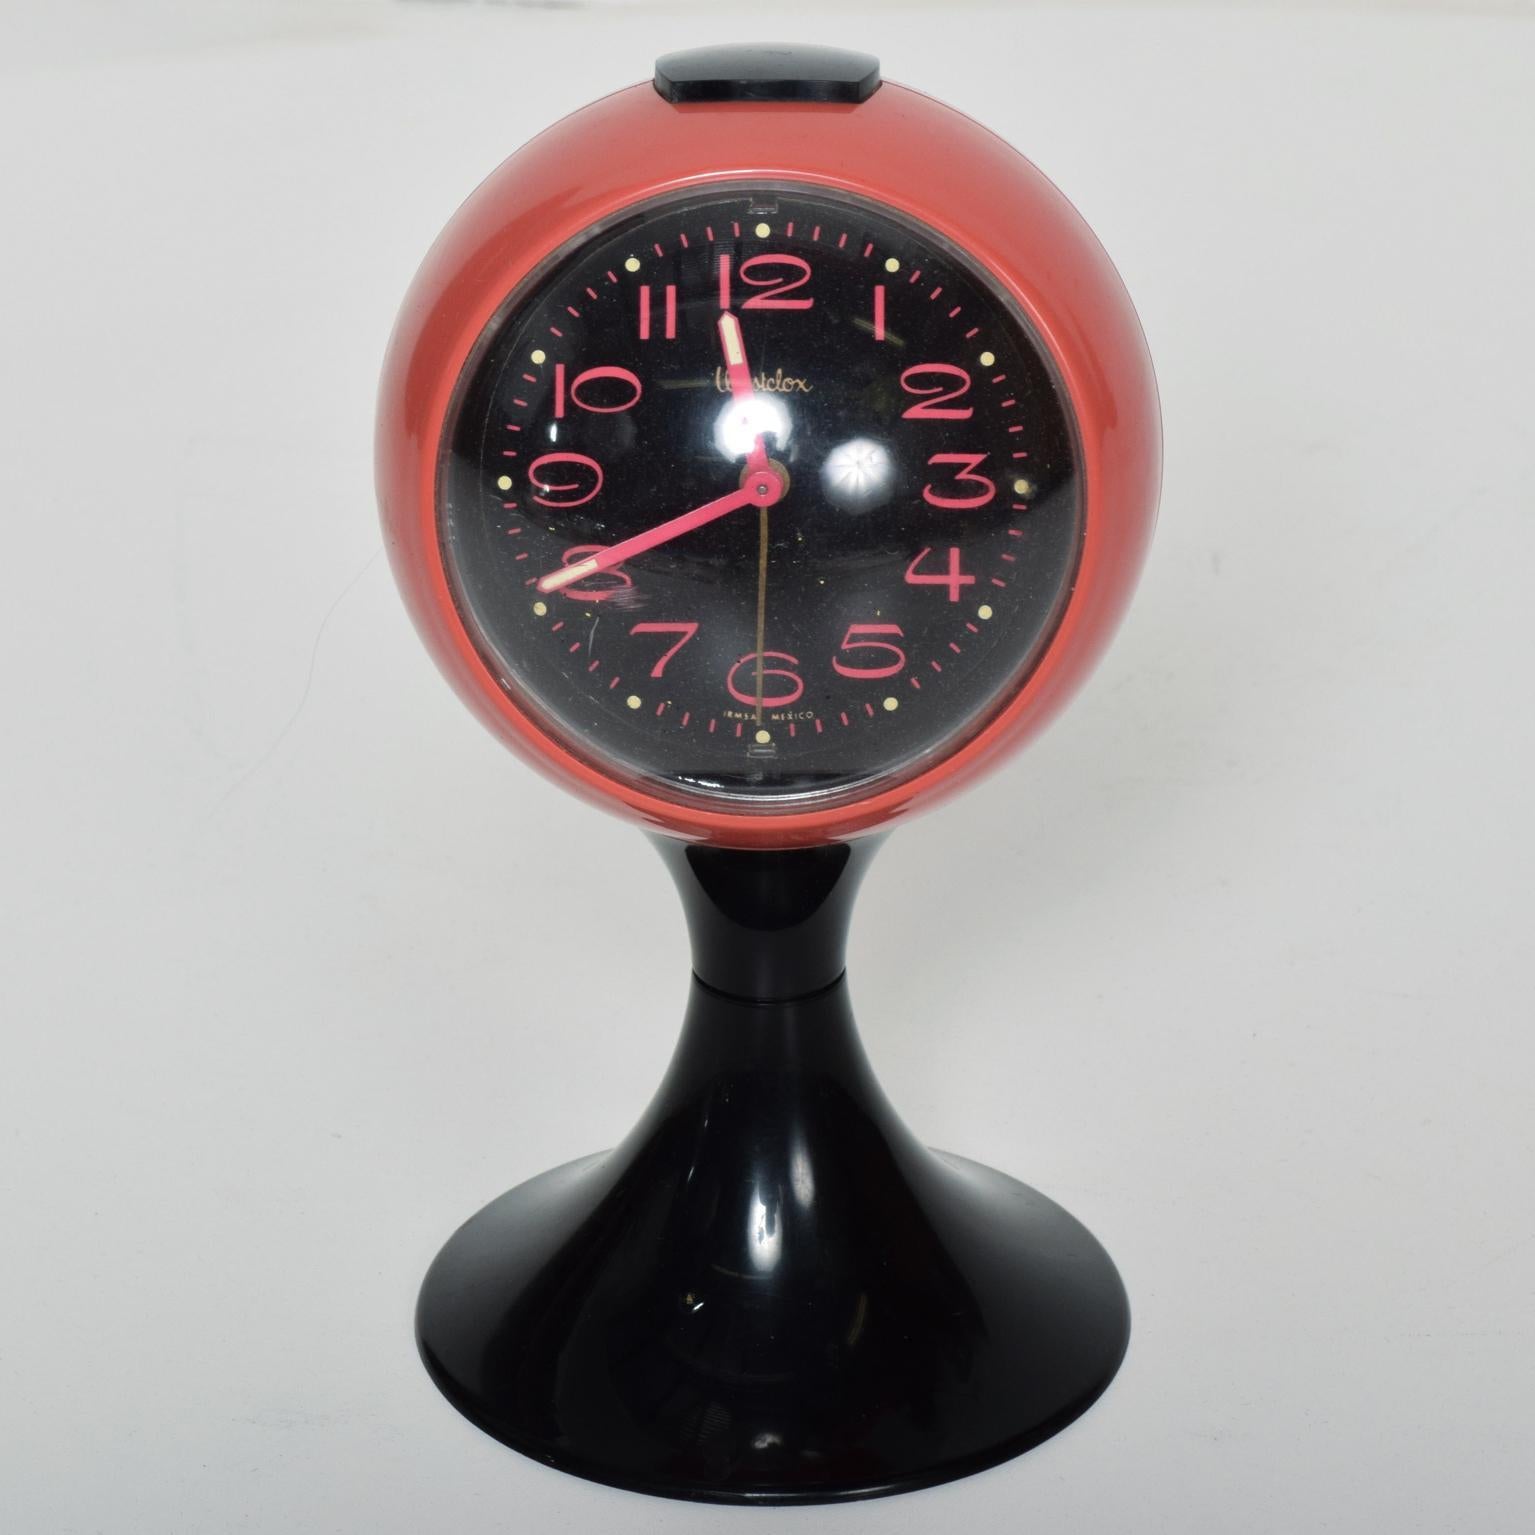 We are pleased to offer for your consideration a beautiful Westclox modern clock. Tulip atomic base with pick color.

Tested and currently working.

Dimensions: 9